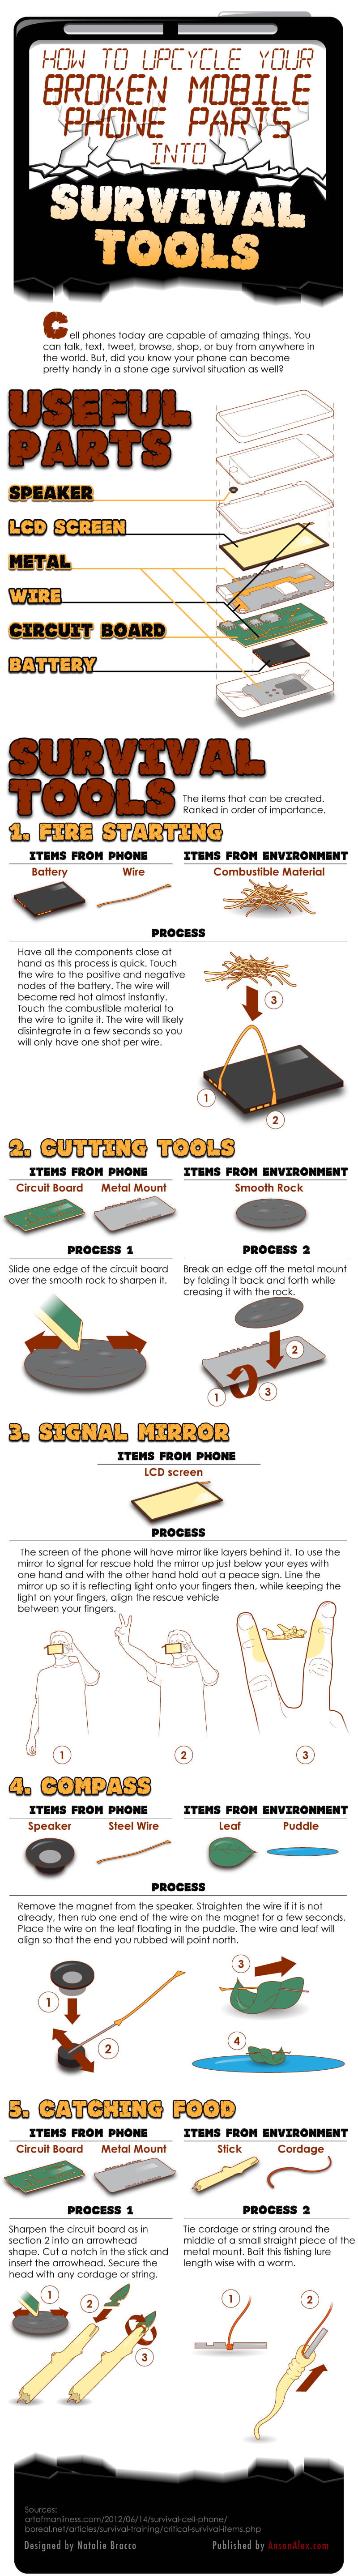 How to Use Parts Broken Cell Phone as Survival Tools Infographic